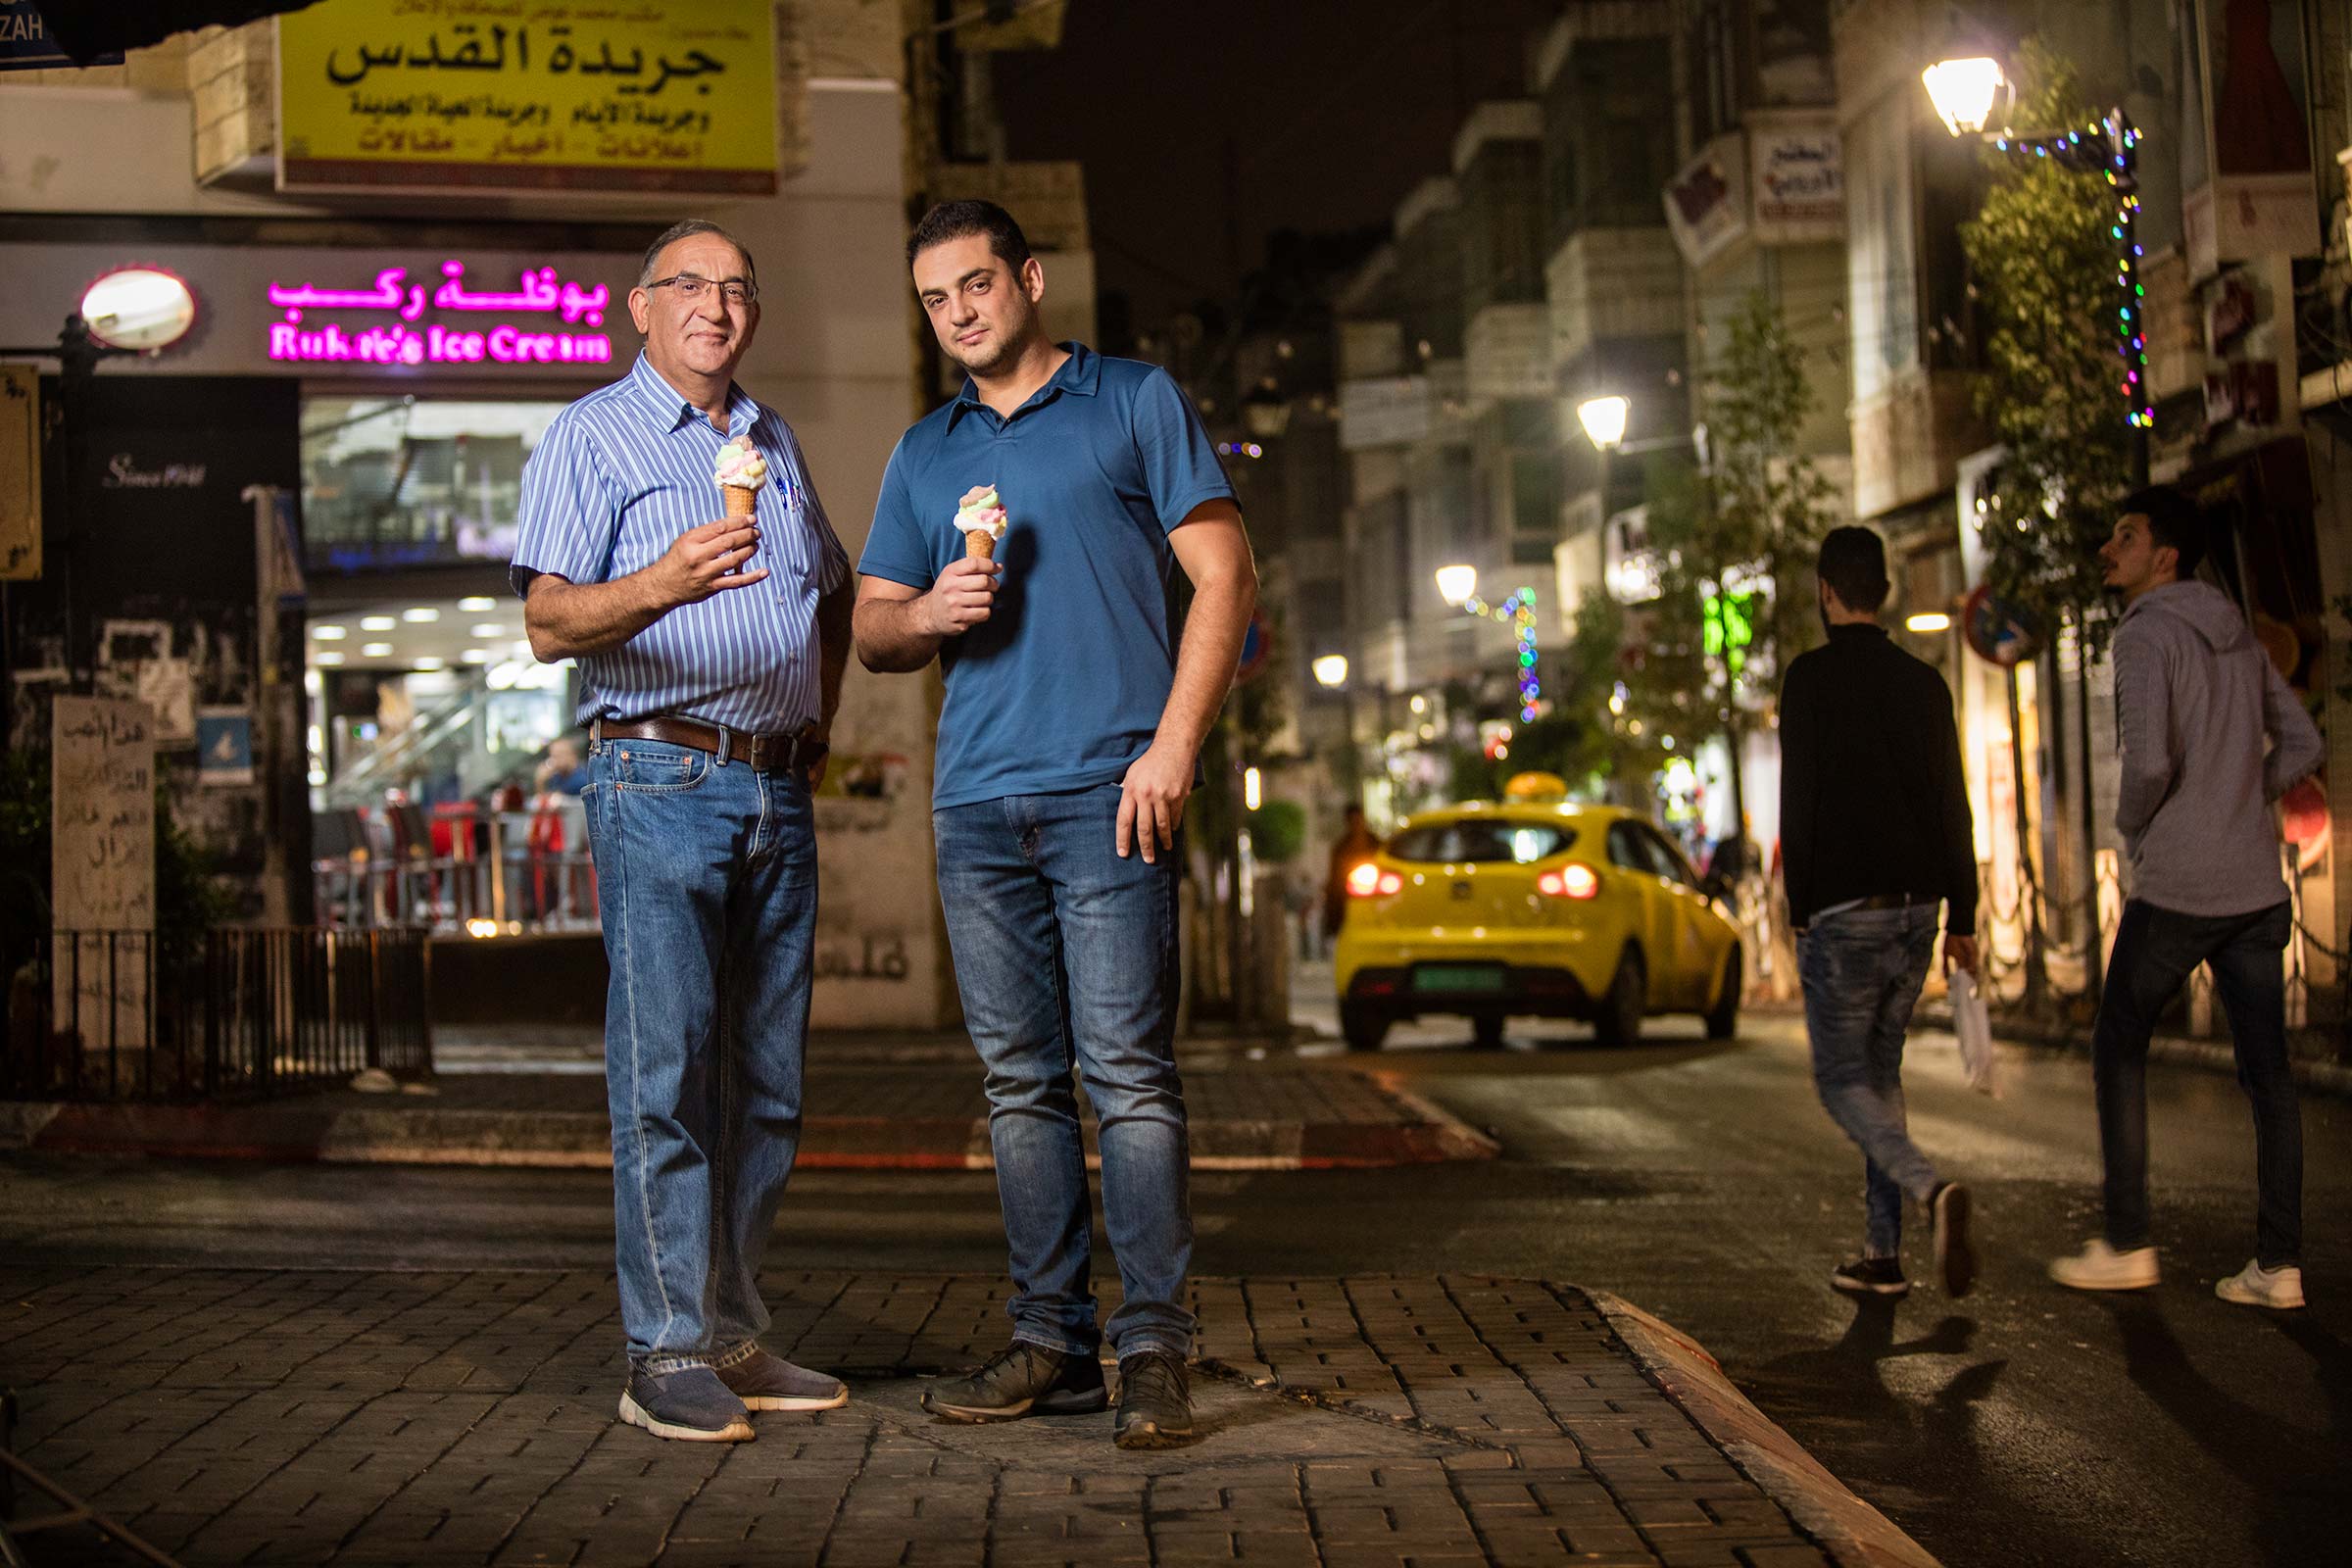 night portrait of father and son coowners of small business in Palestine